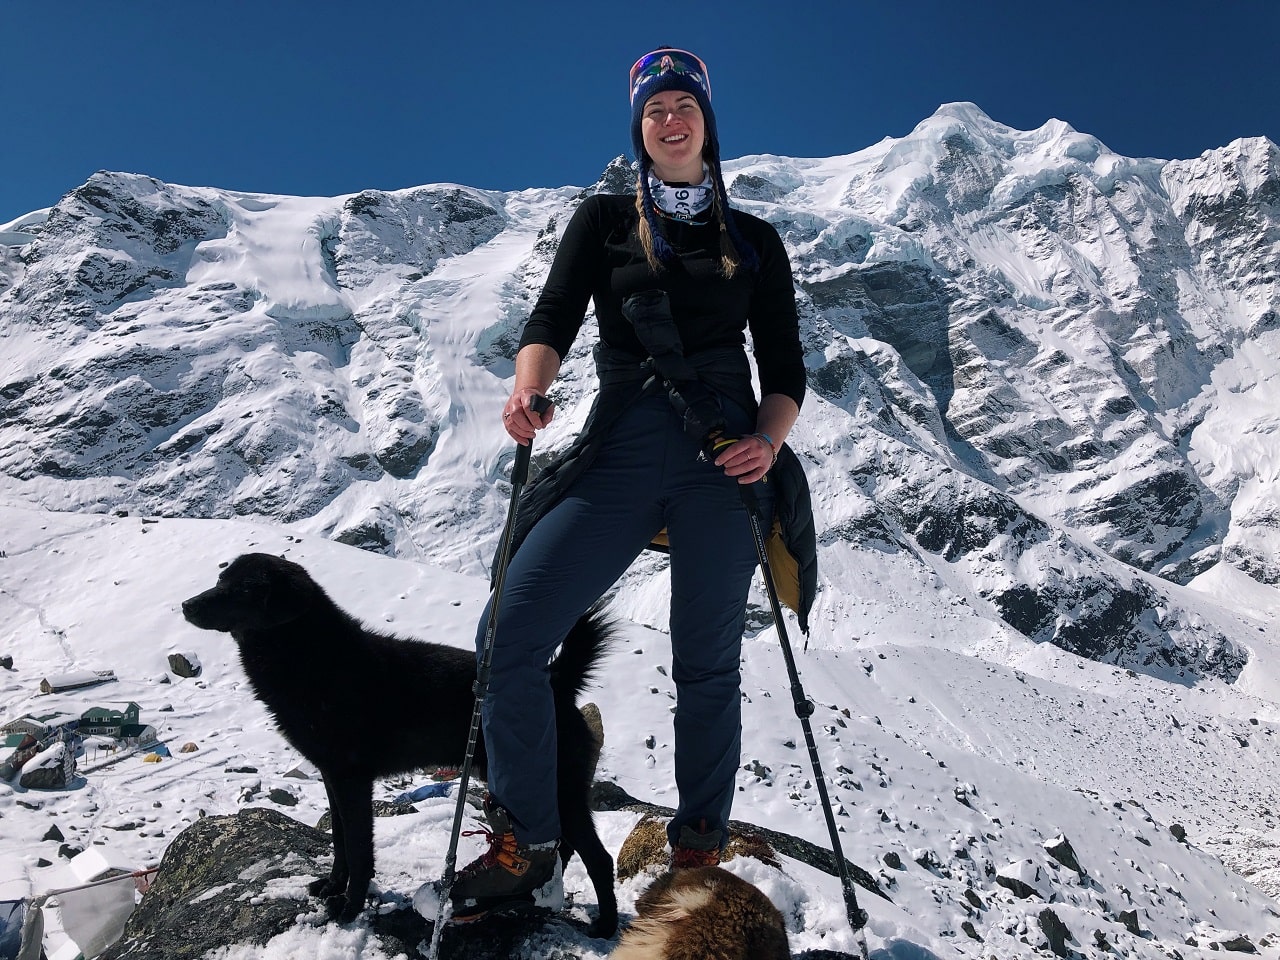 Claire Mackay & a local dog on the acclimatisation climb on the ridge next to Khare